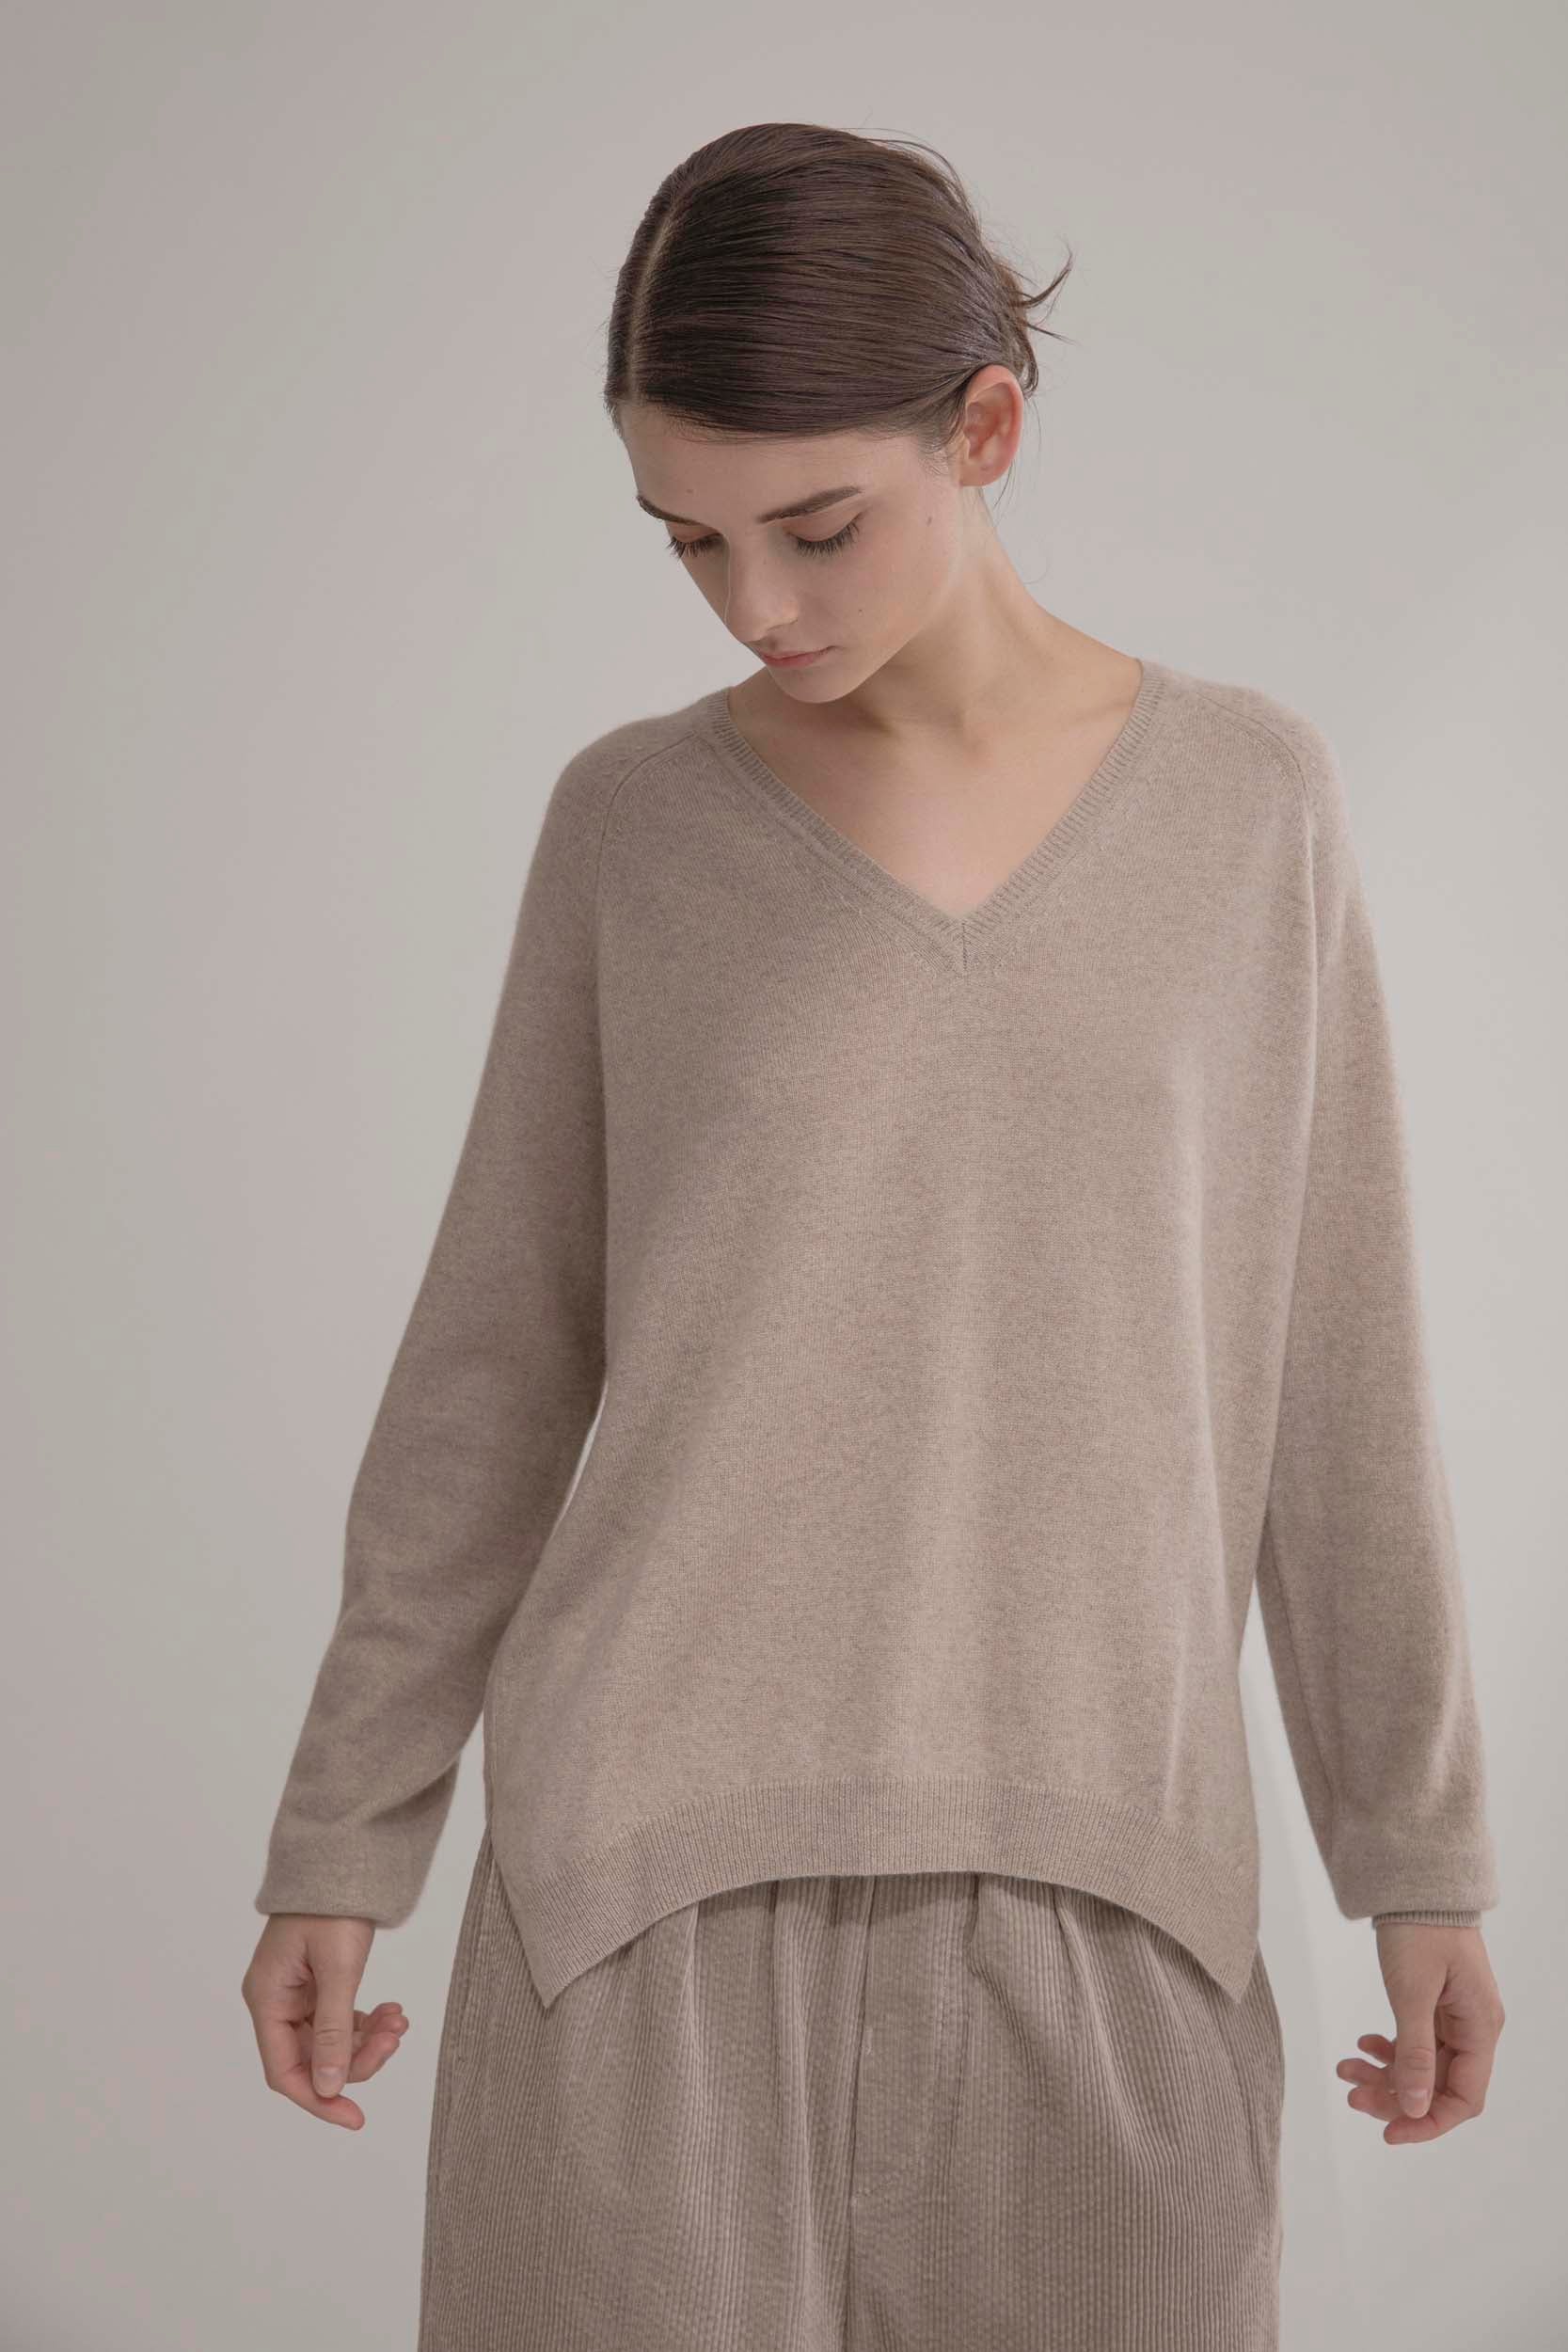 NORAH SUE 100% Cashmere V Neck Long Sleeves Top